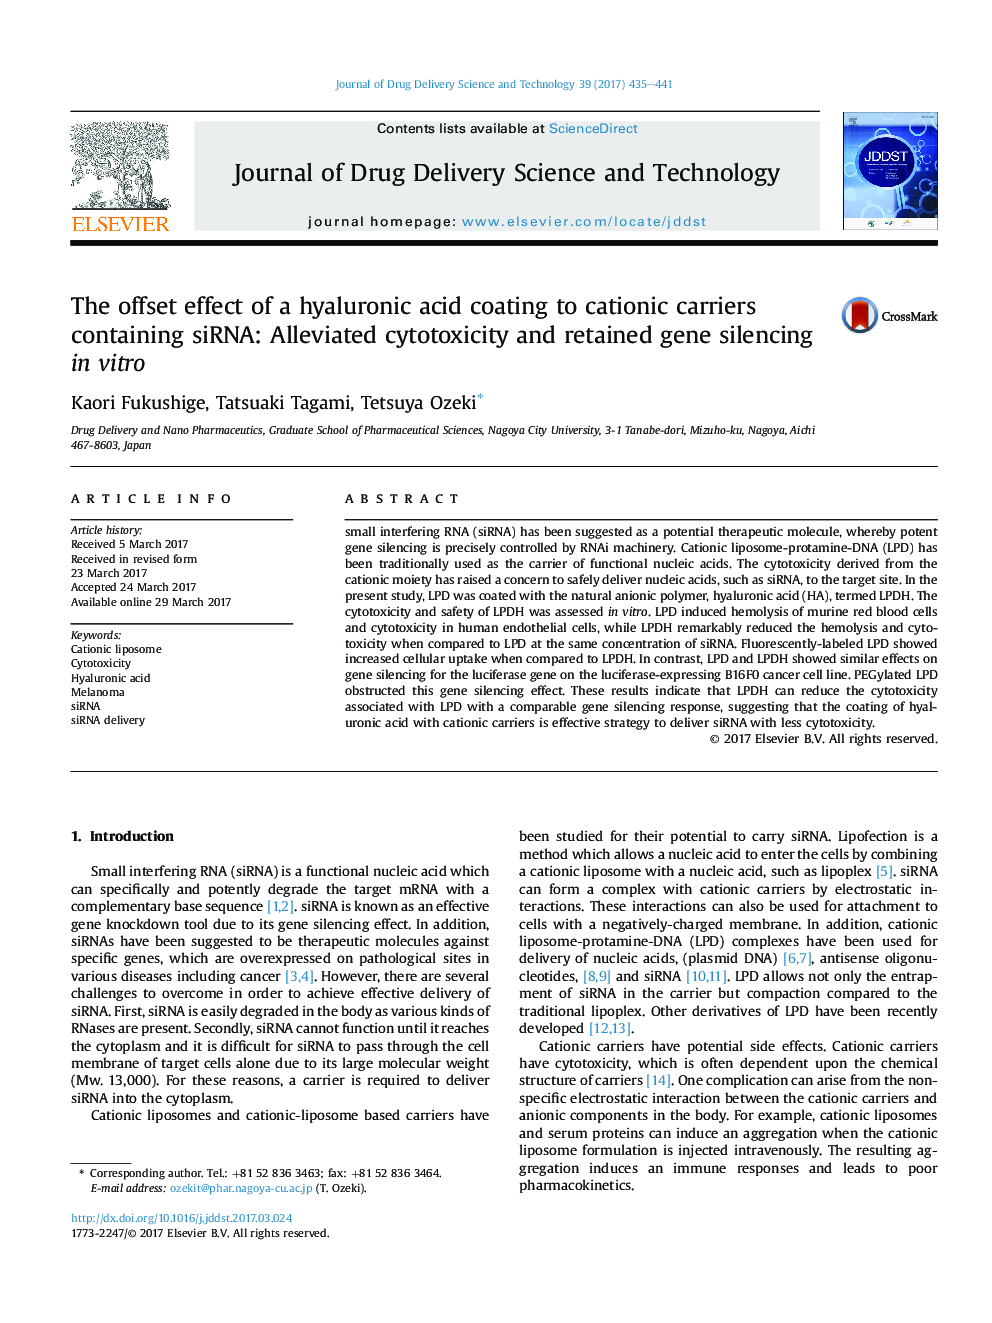 The offset effect of a hyaluronic acid coating to cationic carriers containing siRNA: Alleviated cytotoxicity and retained gene silencing inÂ vitro